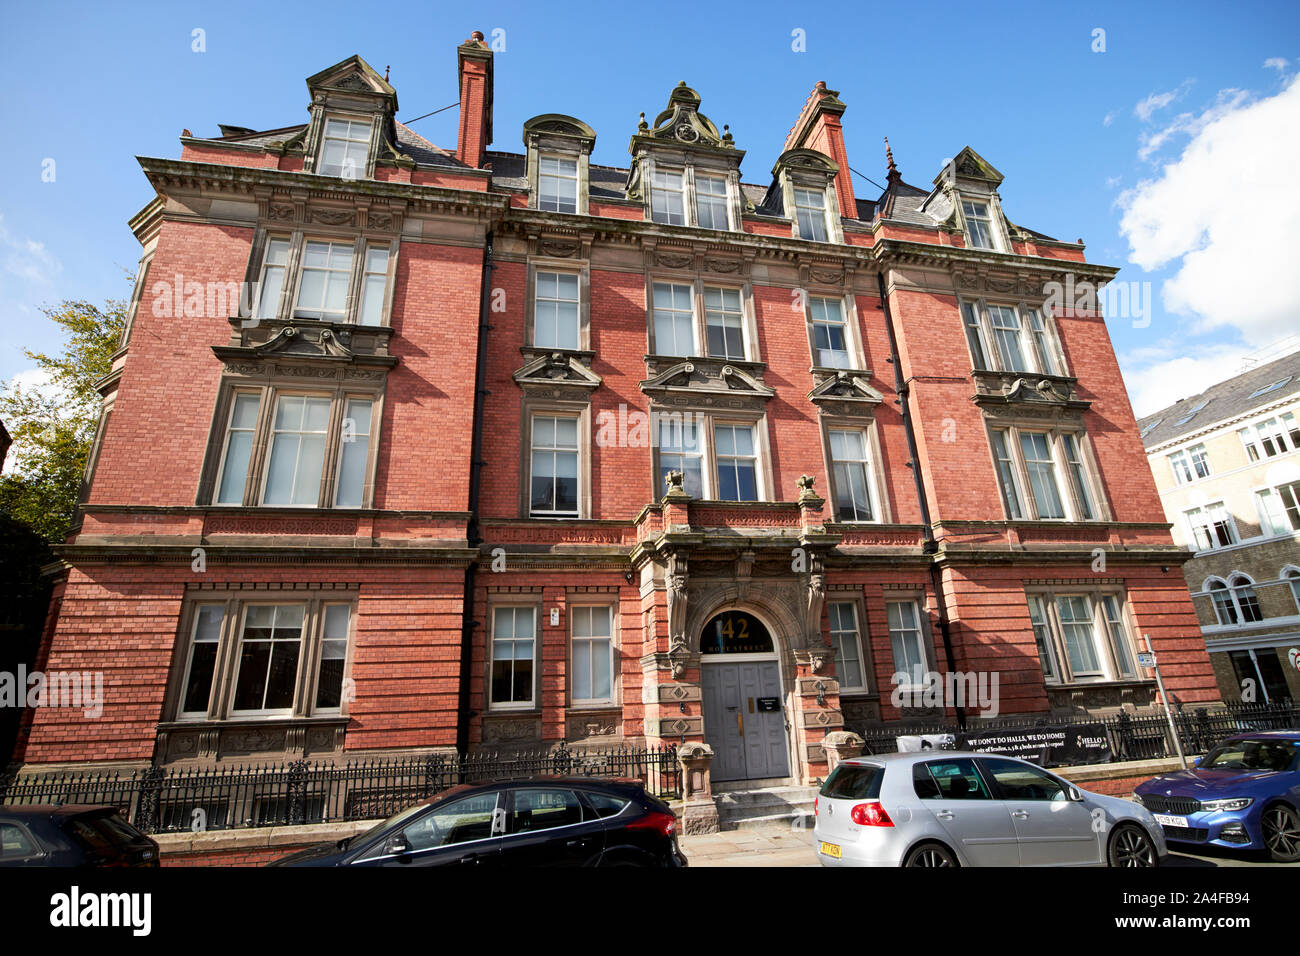 The Hahnemann building former liverpool hahnemann hospital now student lets Liverpool England UK Stock Photo